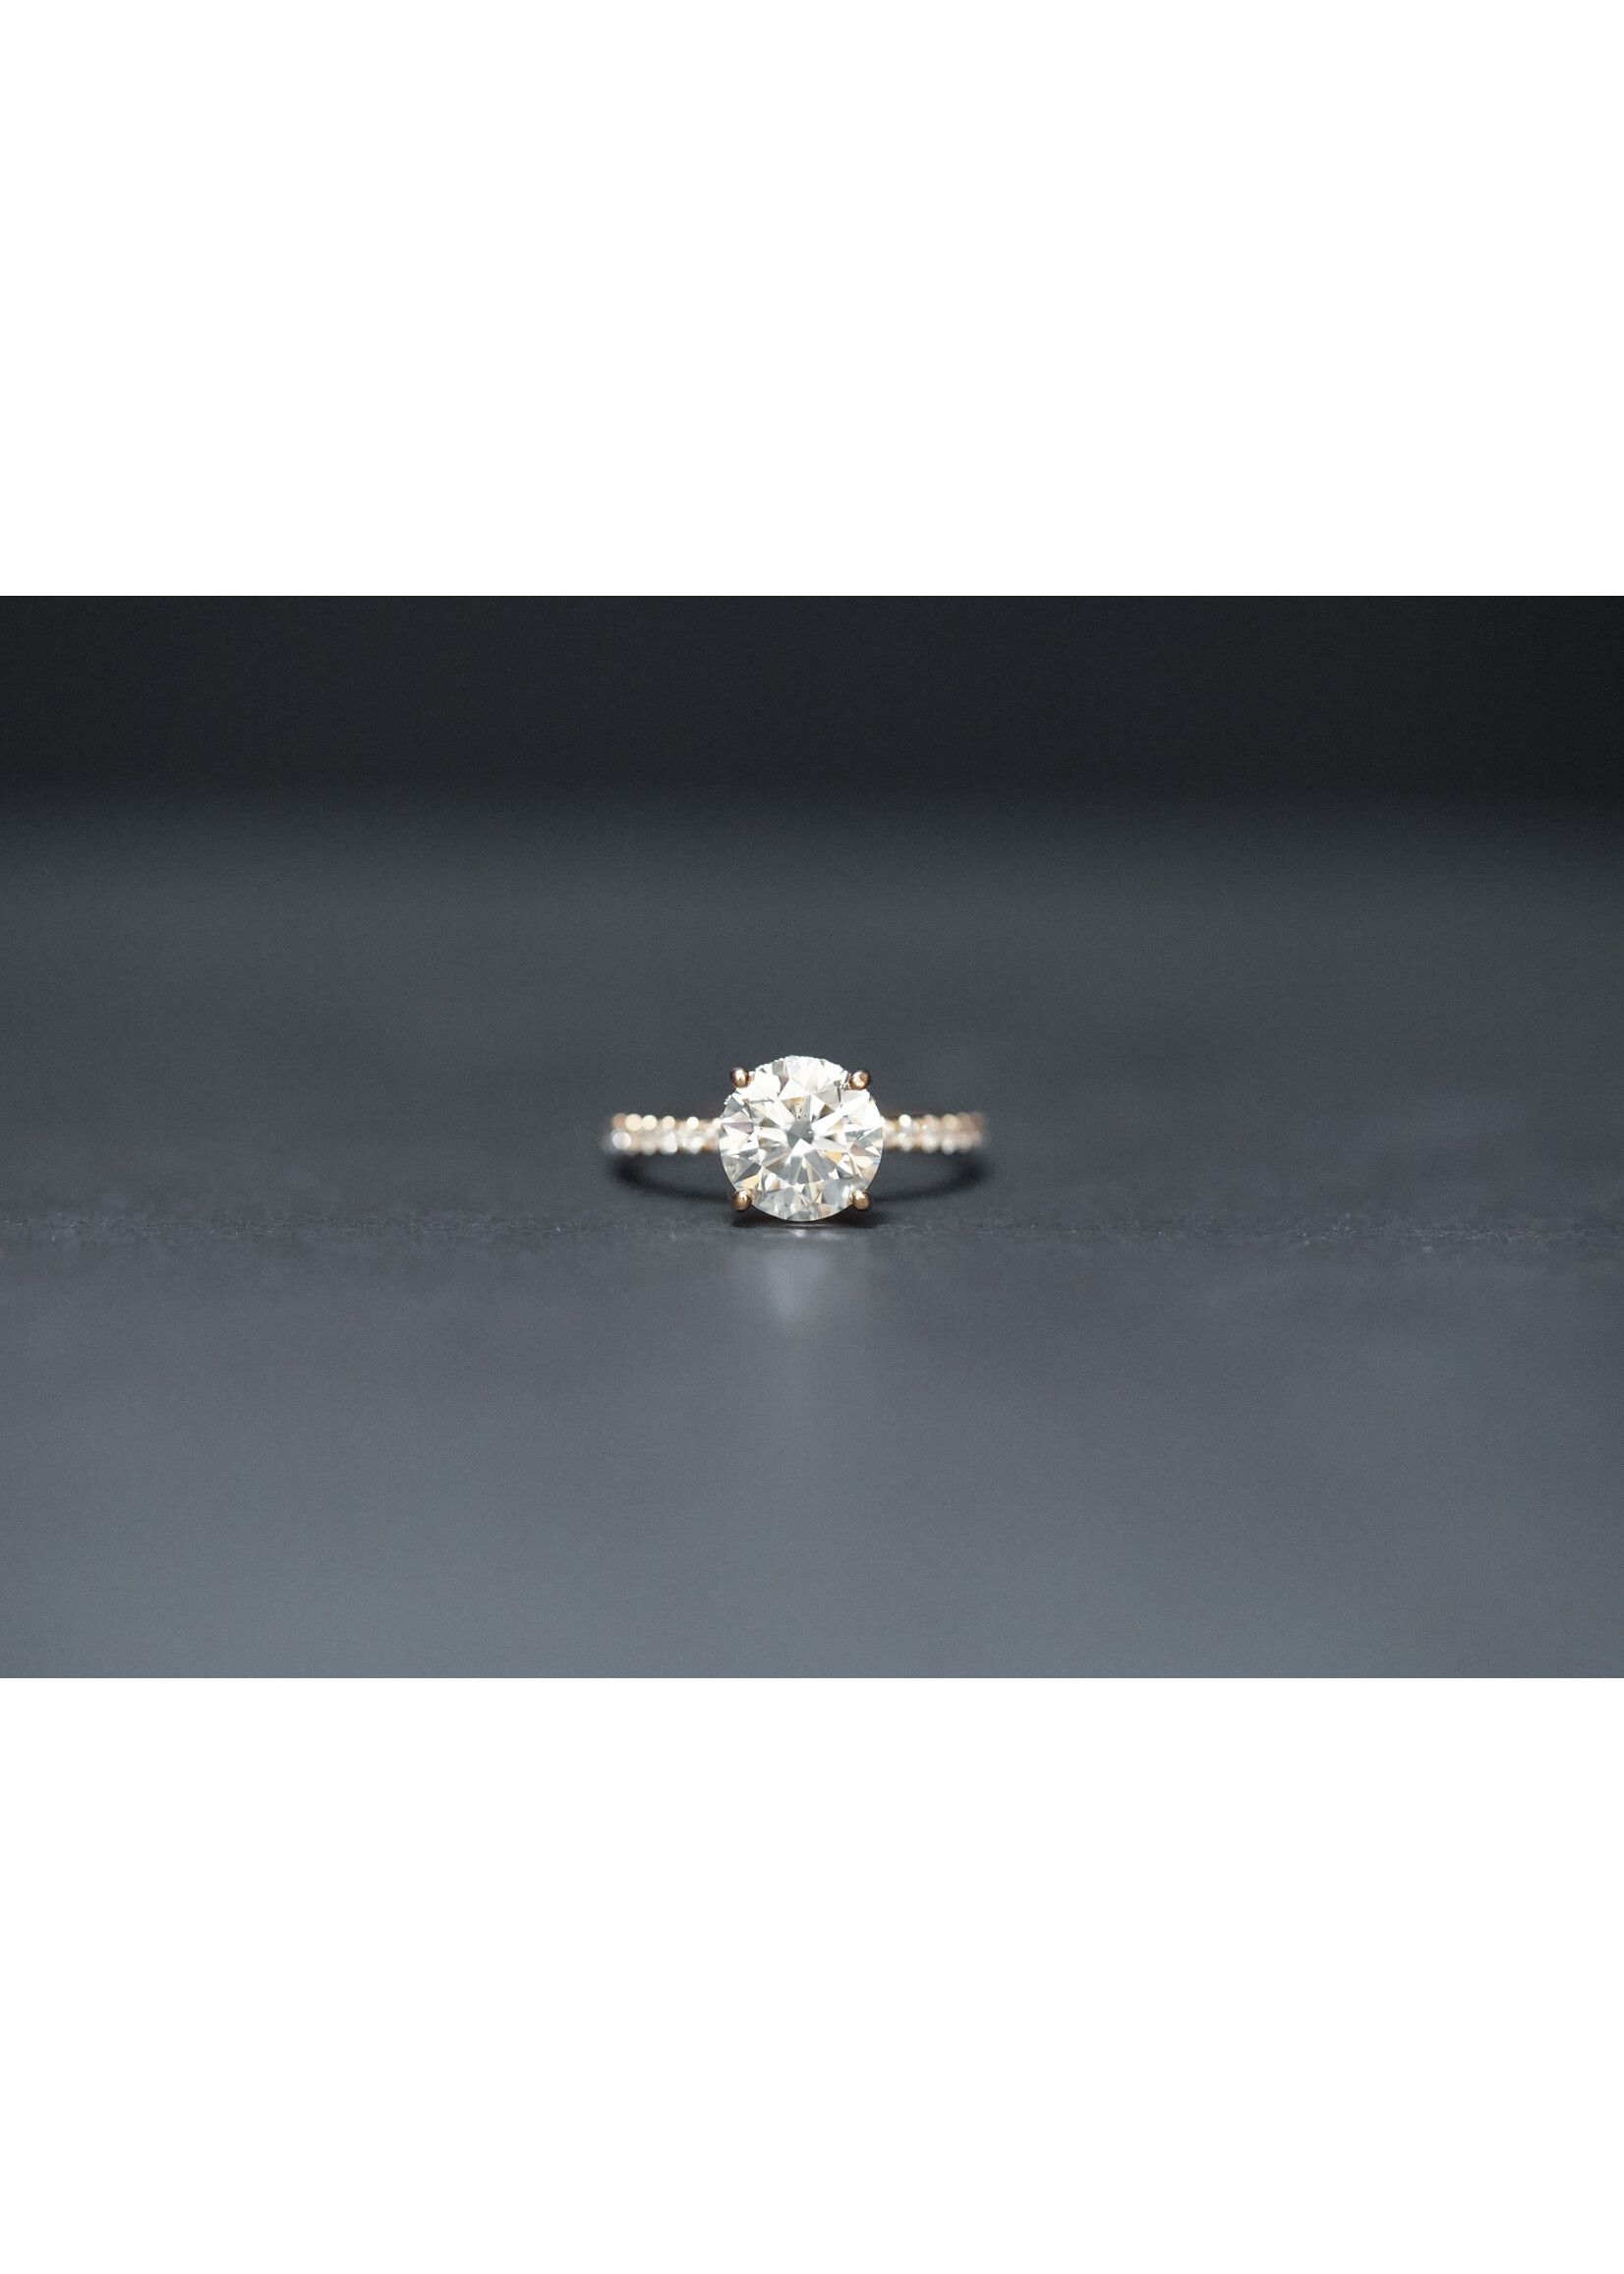 18KY 2.83g 2.56ctw (2.24ctr) G/SI2 GIA Round Diamond Hidden Halo Engagement Ring (size 6.5)